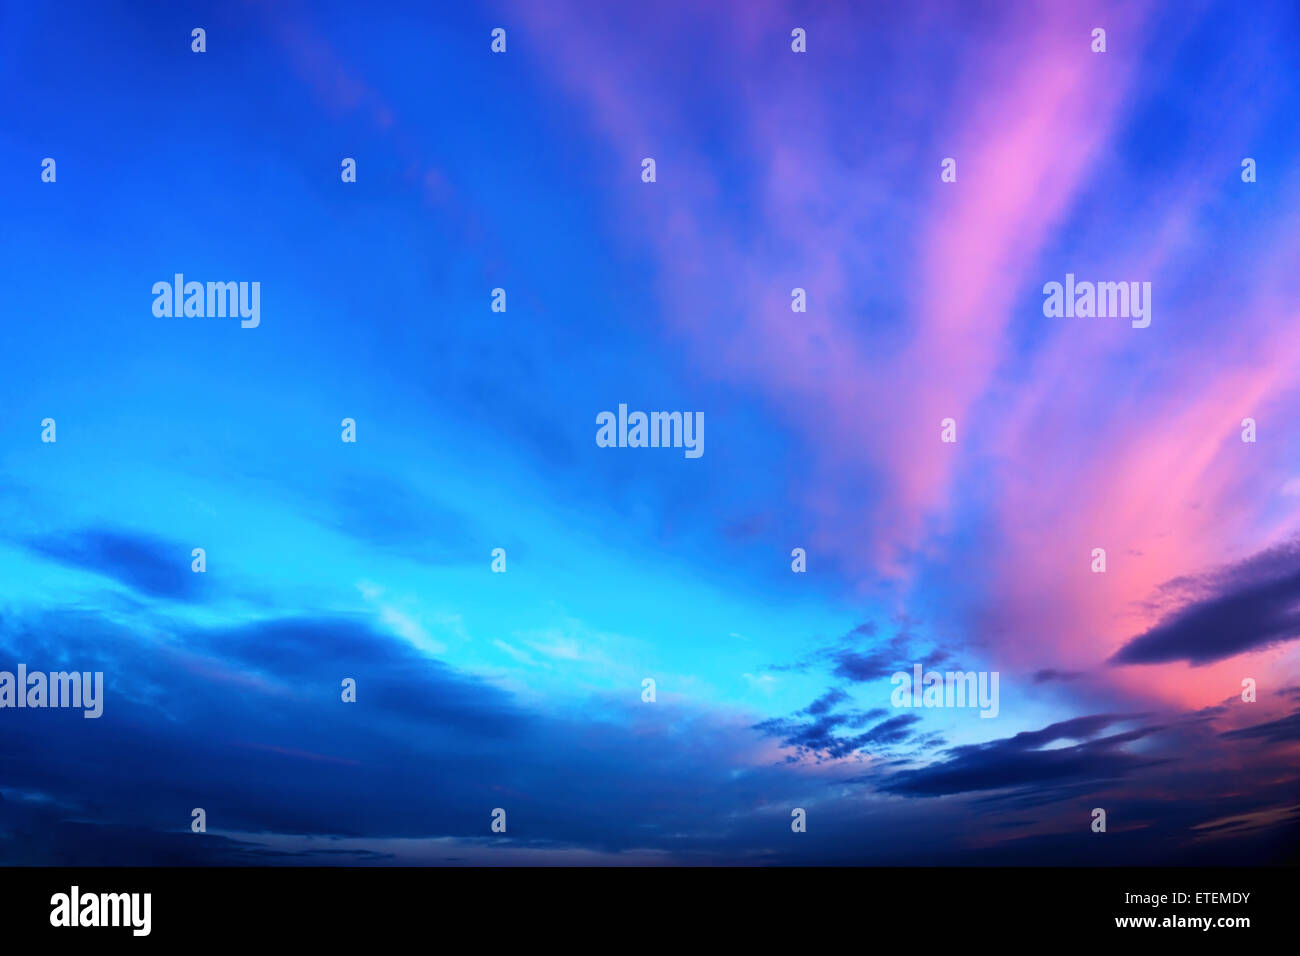 Twilight sky background in deep blue with vivid pink clouds Stock Photo